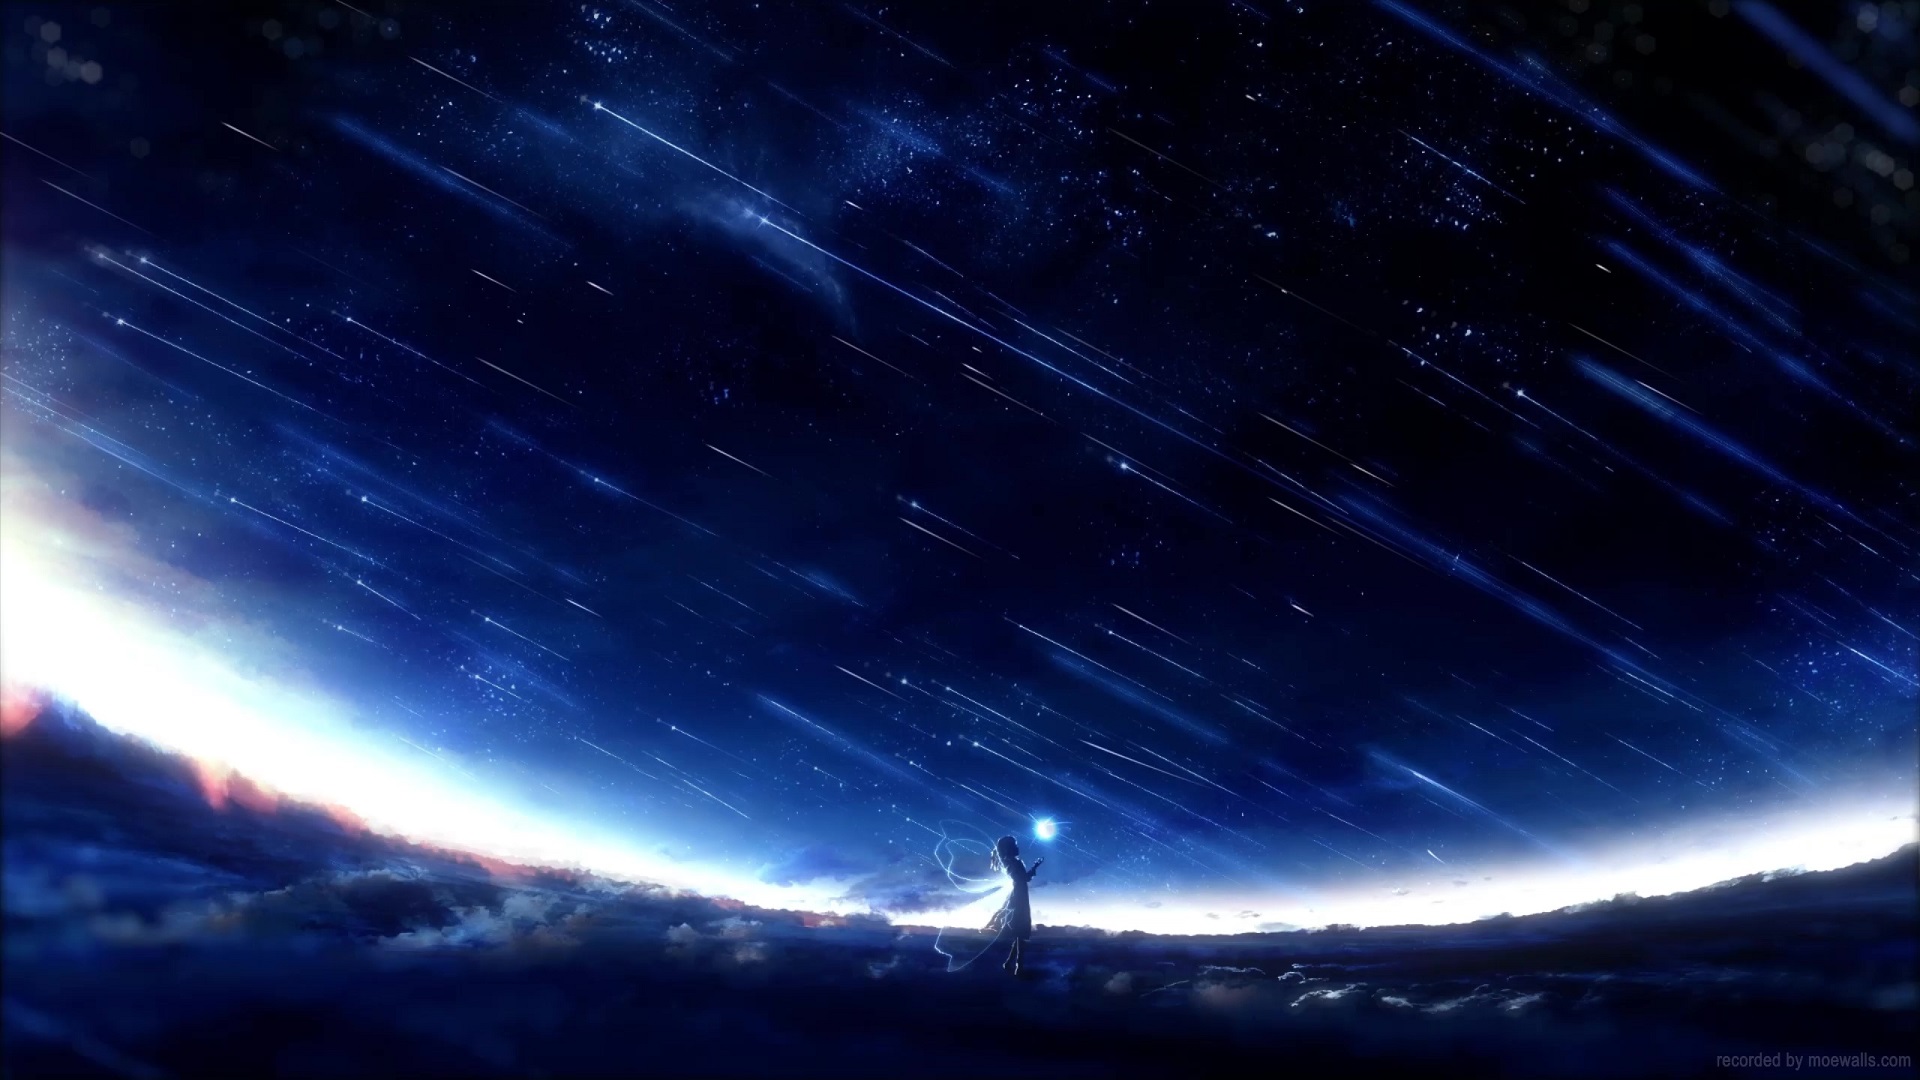 Catching The Stars Wallpaper, HD Anime 4K Wallpapers, Images and Background  - Wallpapers Den